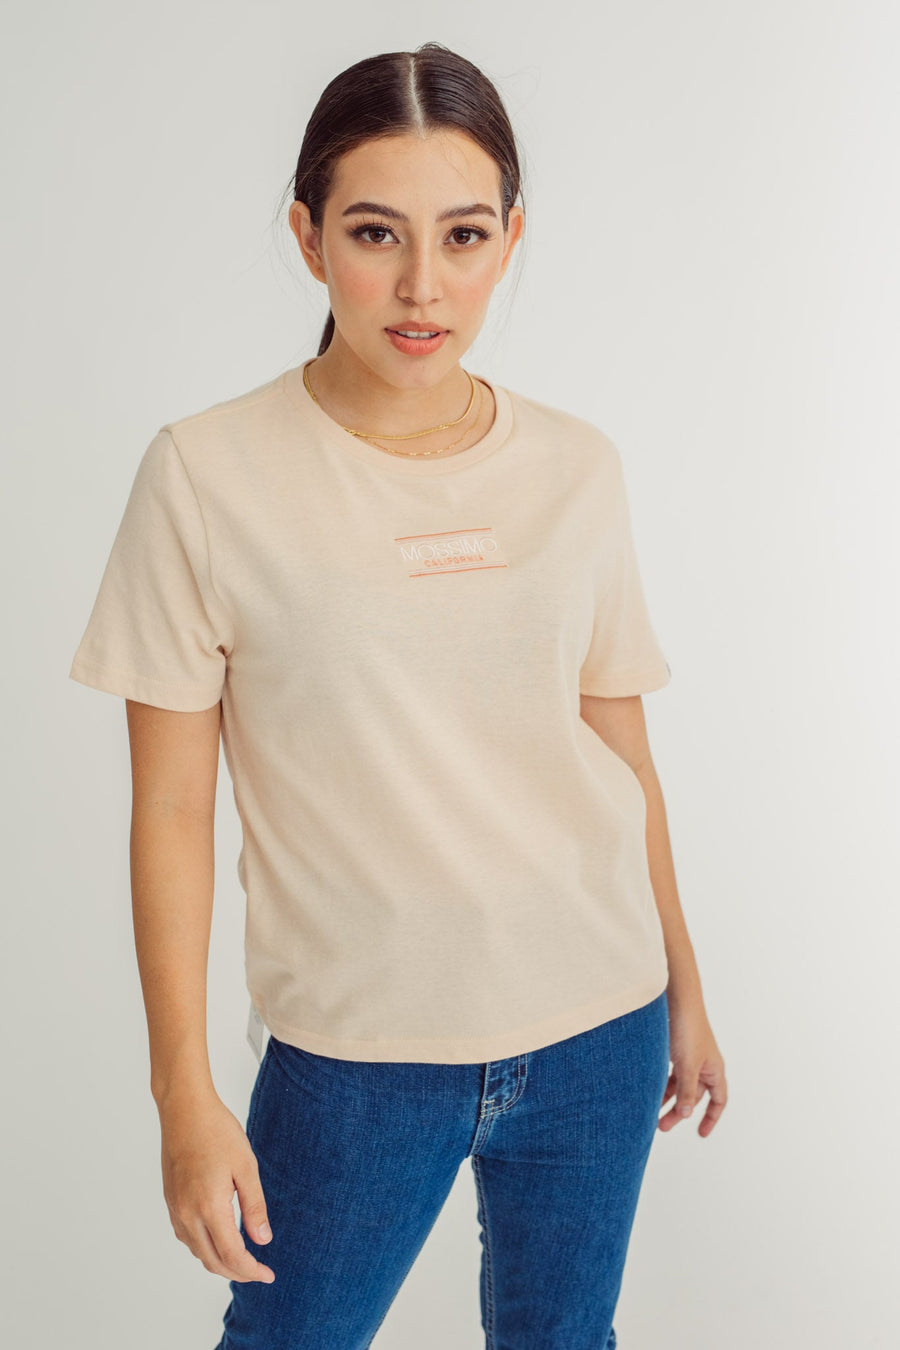 Ivory Cream with Small Branding Embroidery Comfort Fit Tee - Mossimo PH